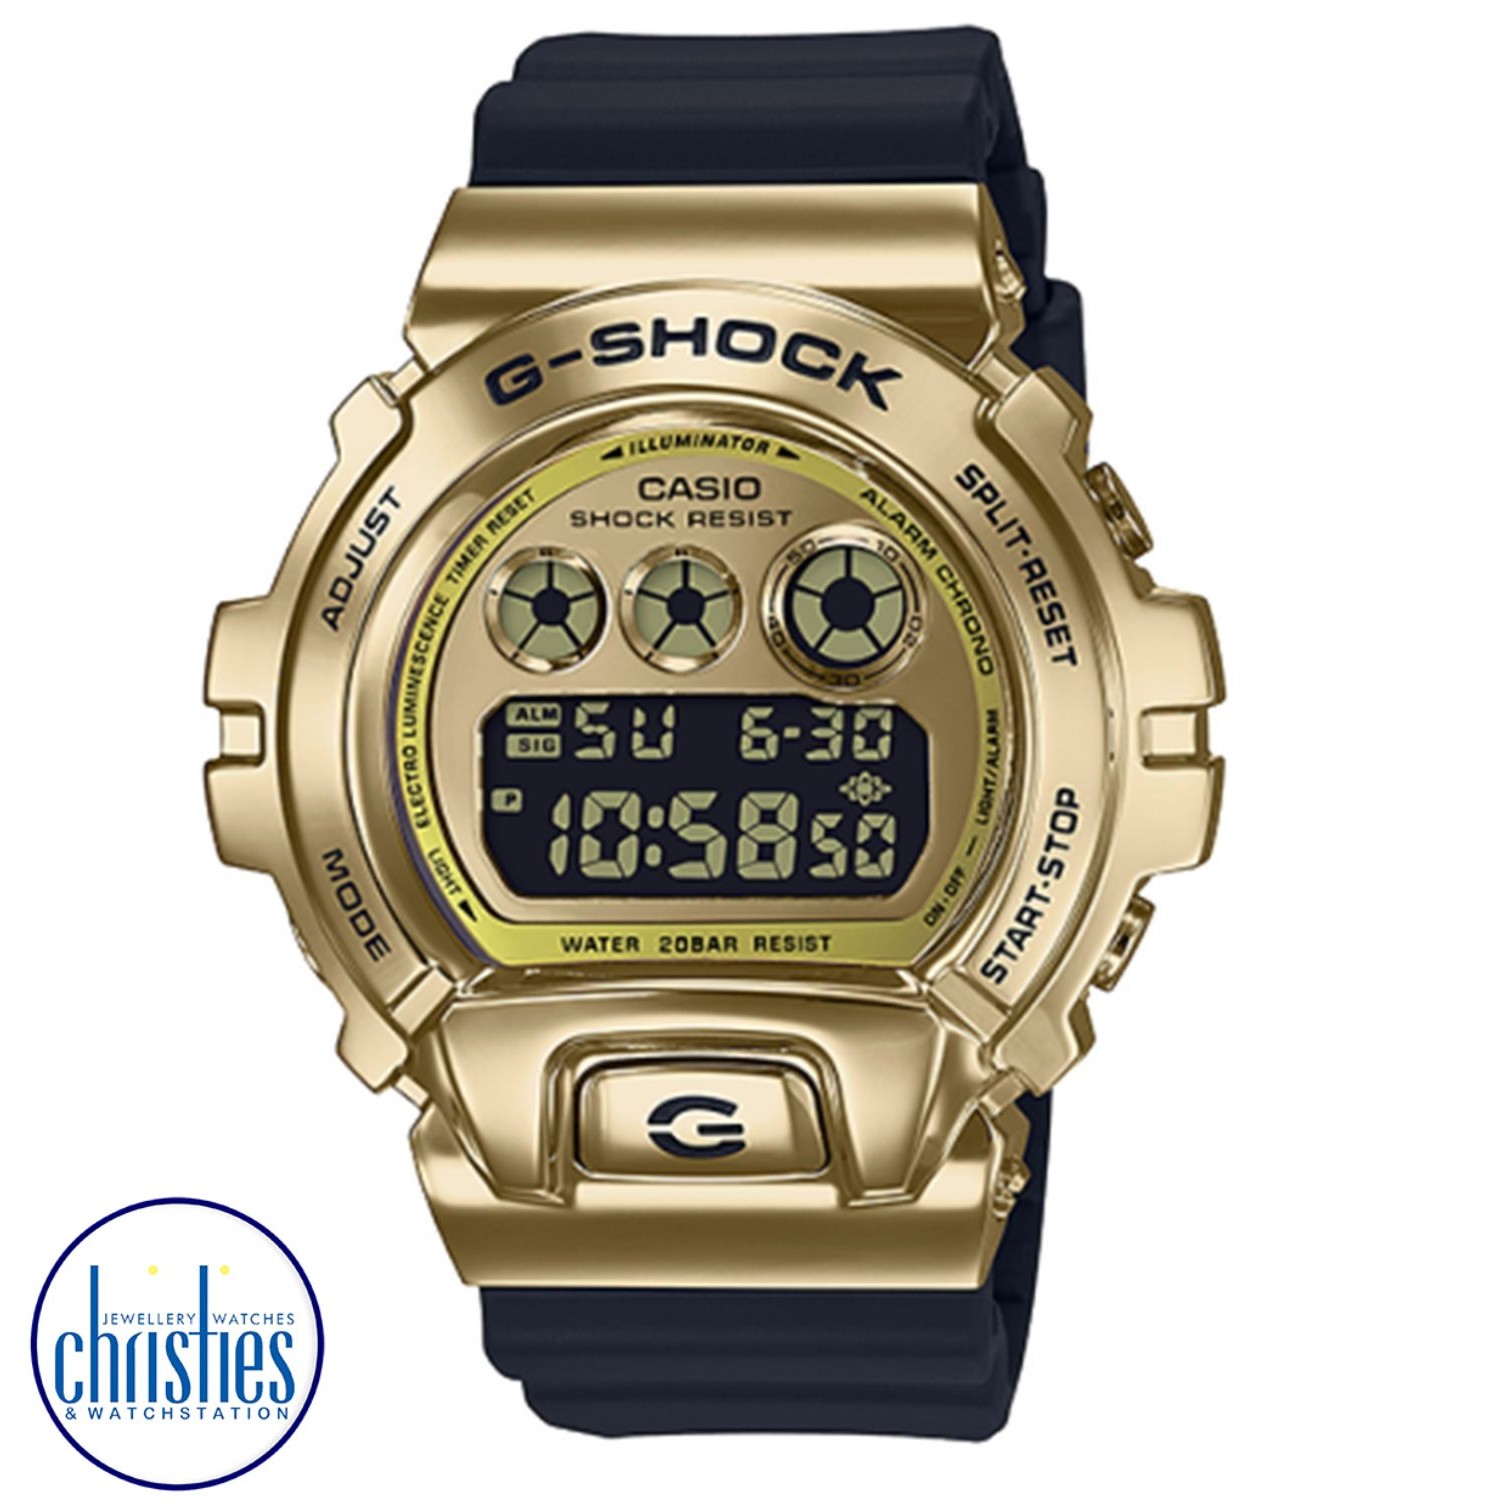 GM6900G-9D G-Shock Gold Ingot Series Watch. Introducing three additions to the G-SHOCK Metal Covered lineup with stainless steel bezels that have been designed based on a GOLD INGOT motif.